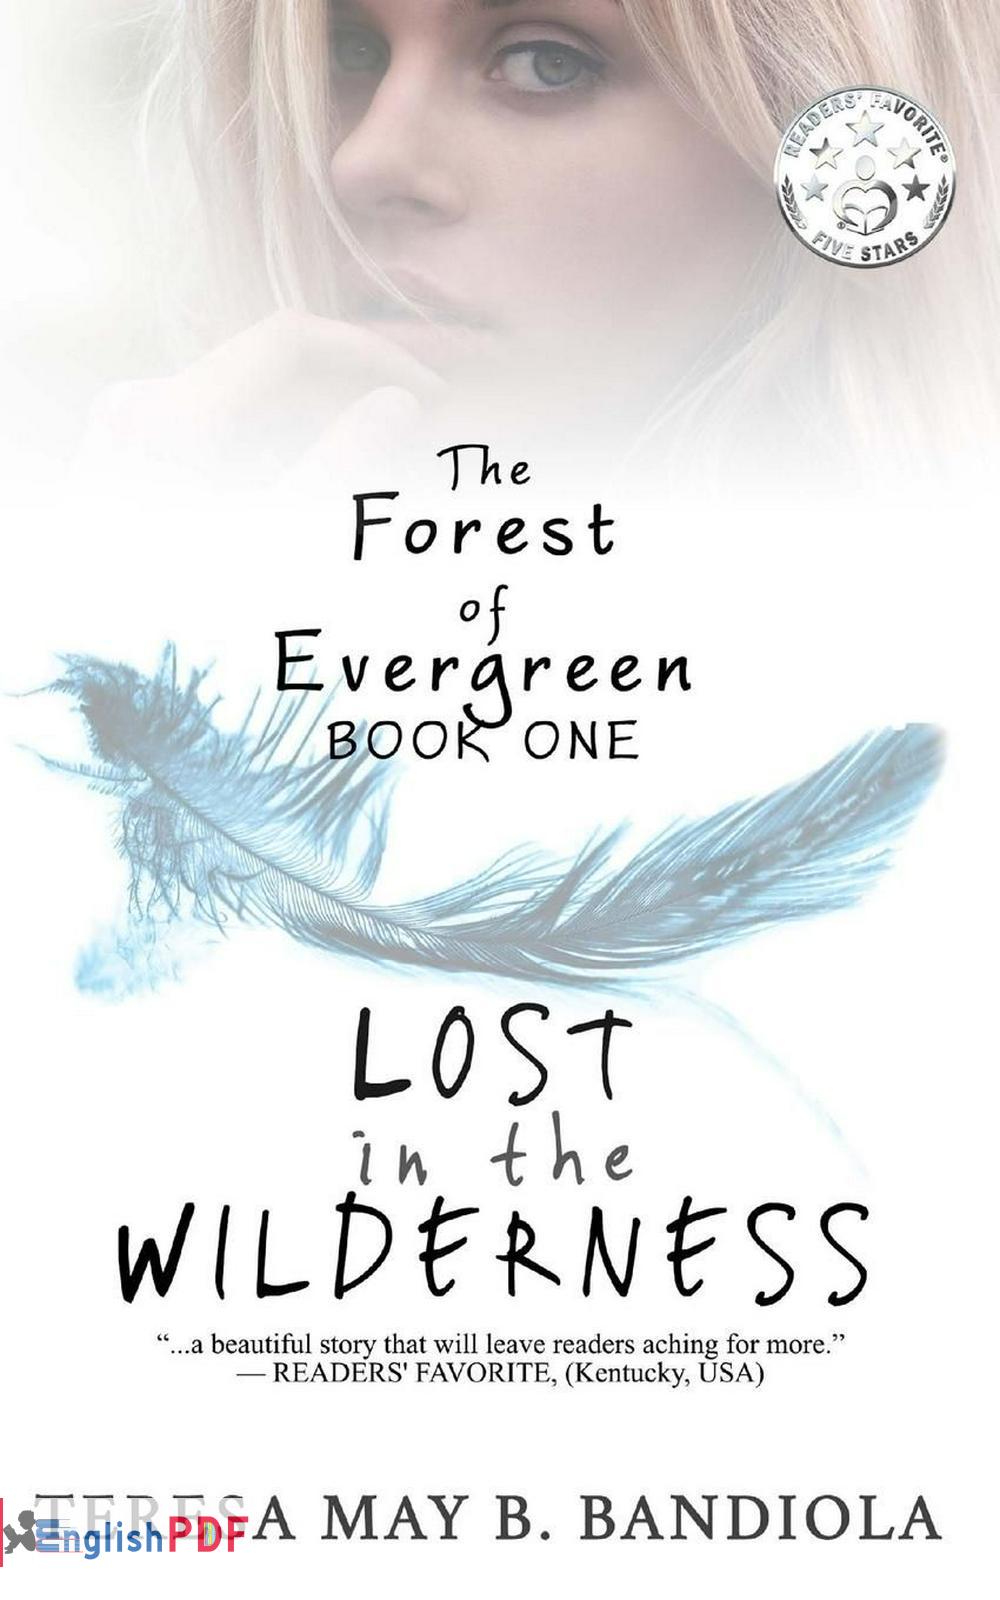 The Forest of Evergreen: Lost in the Wilderness